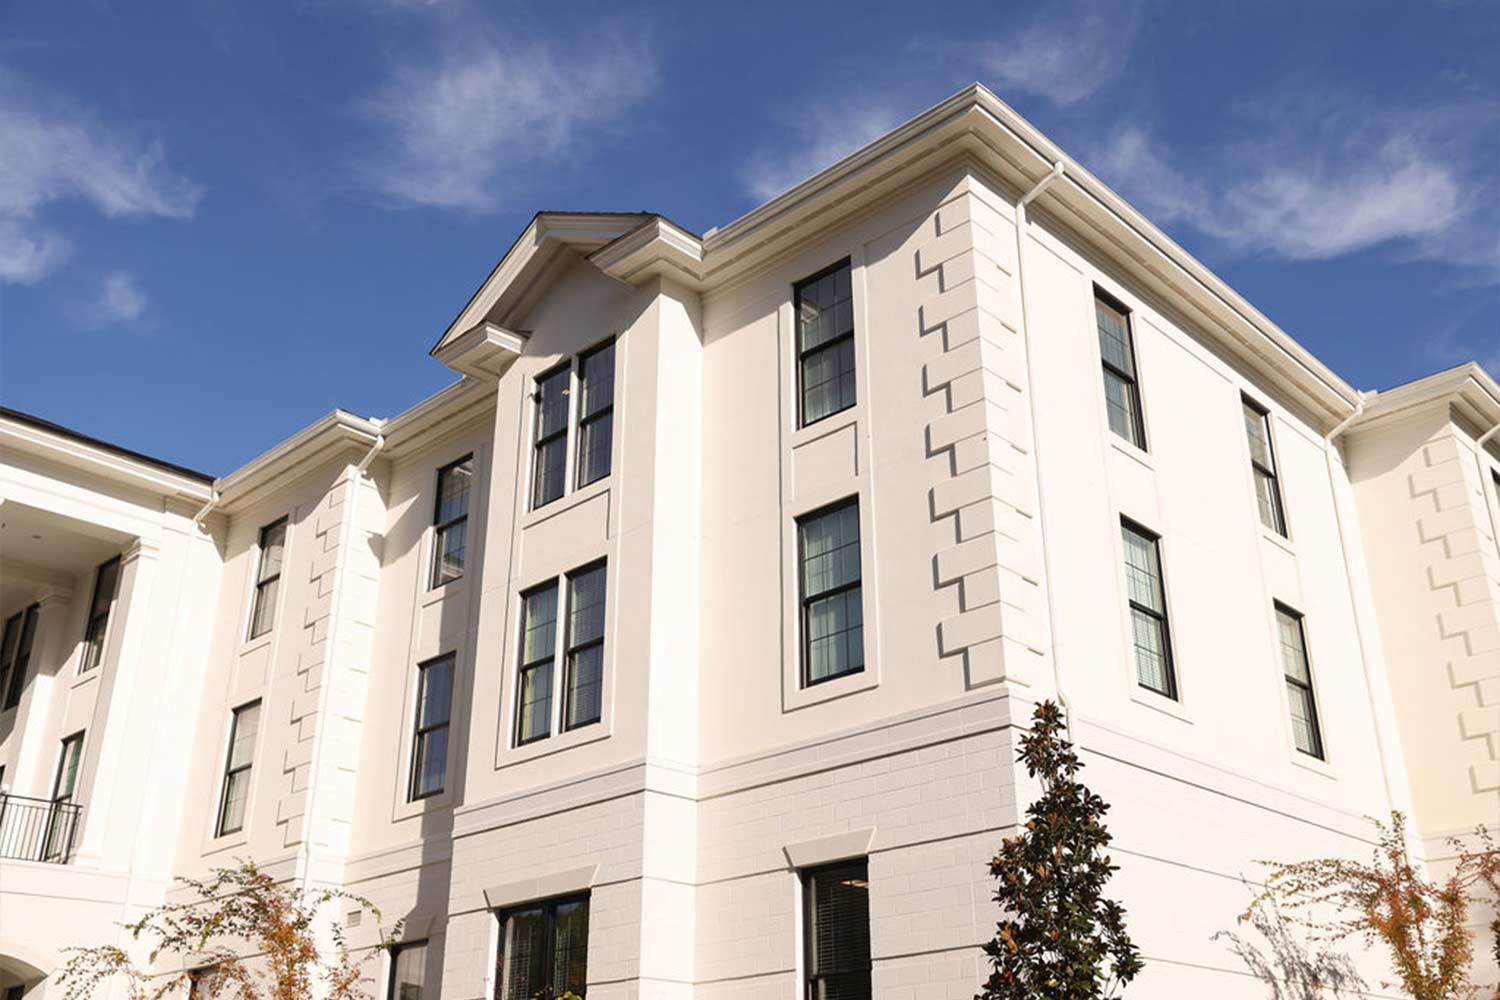 Wofford Residence Hall